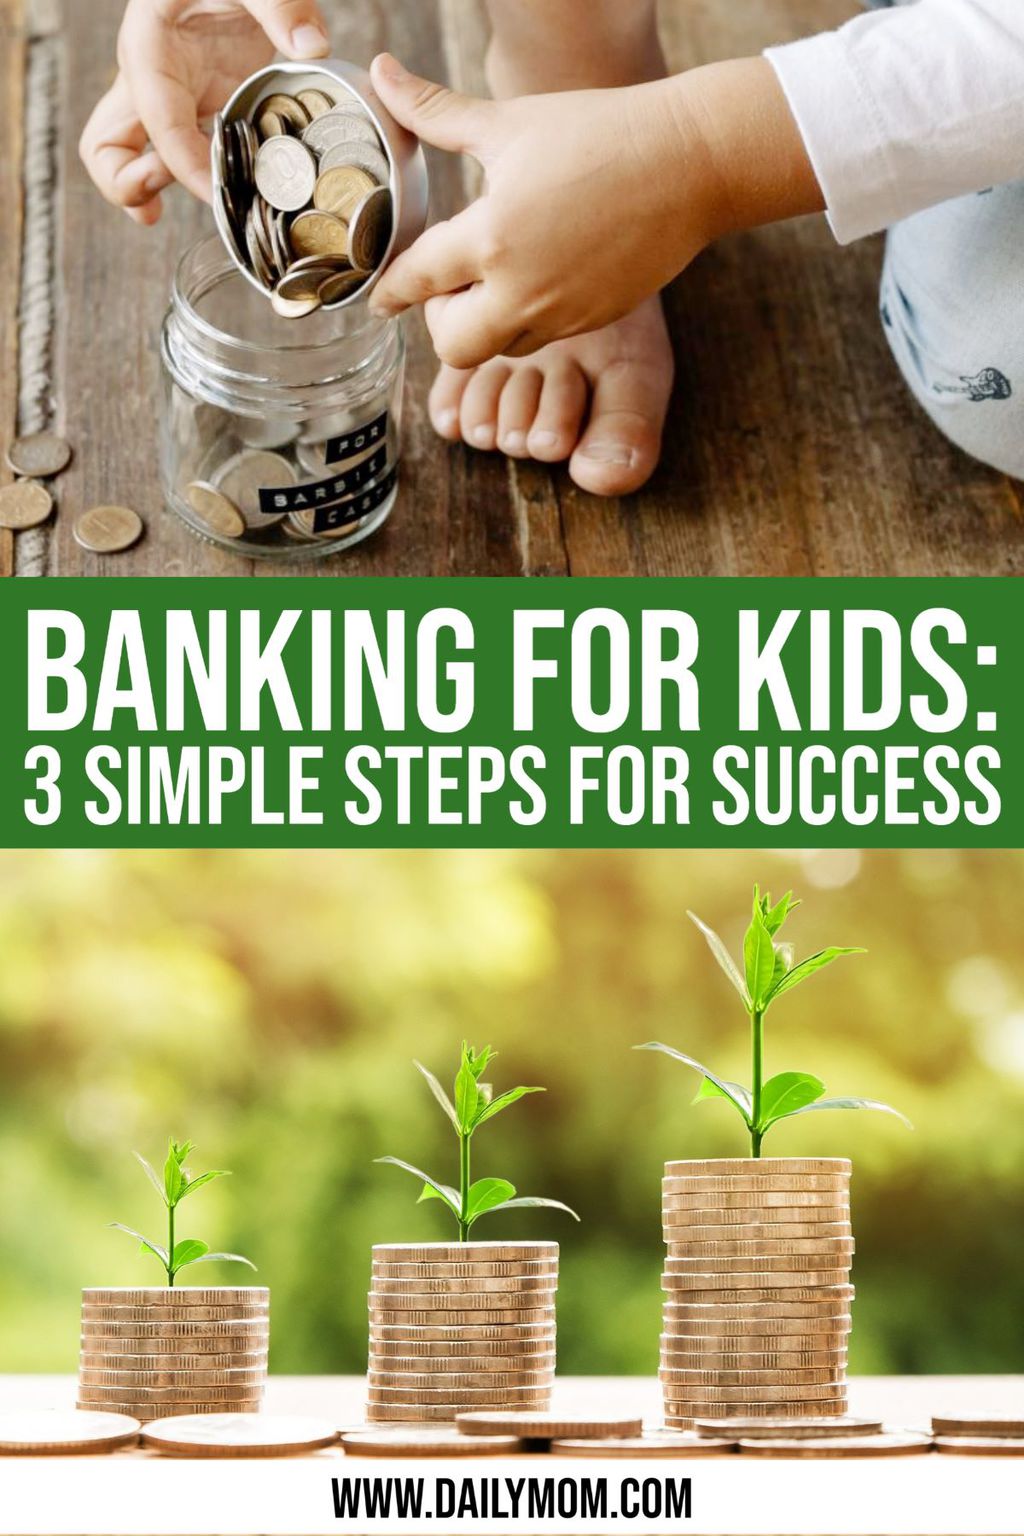 Banking For Kids: 3 Simple Steps For Success